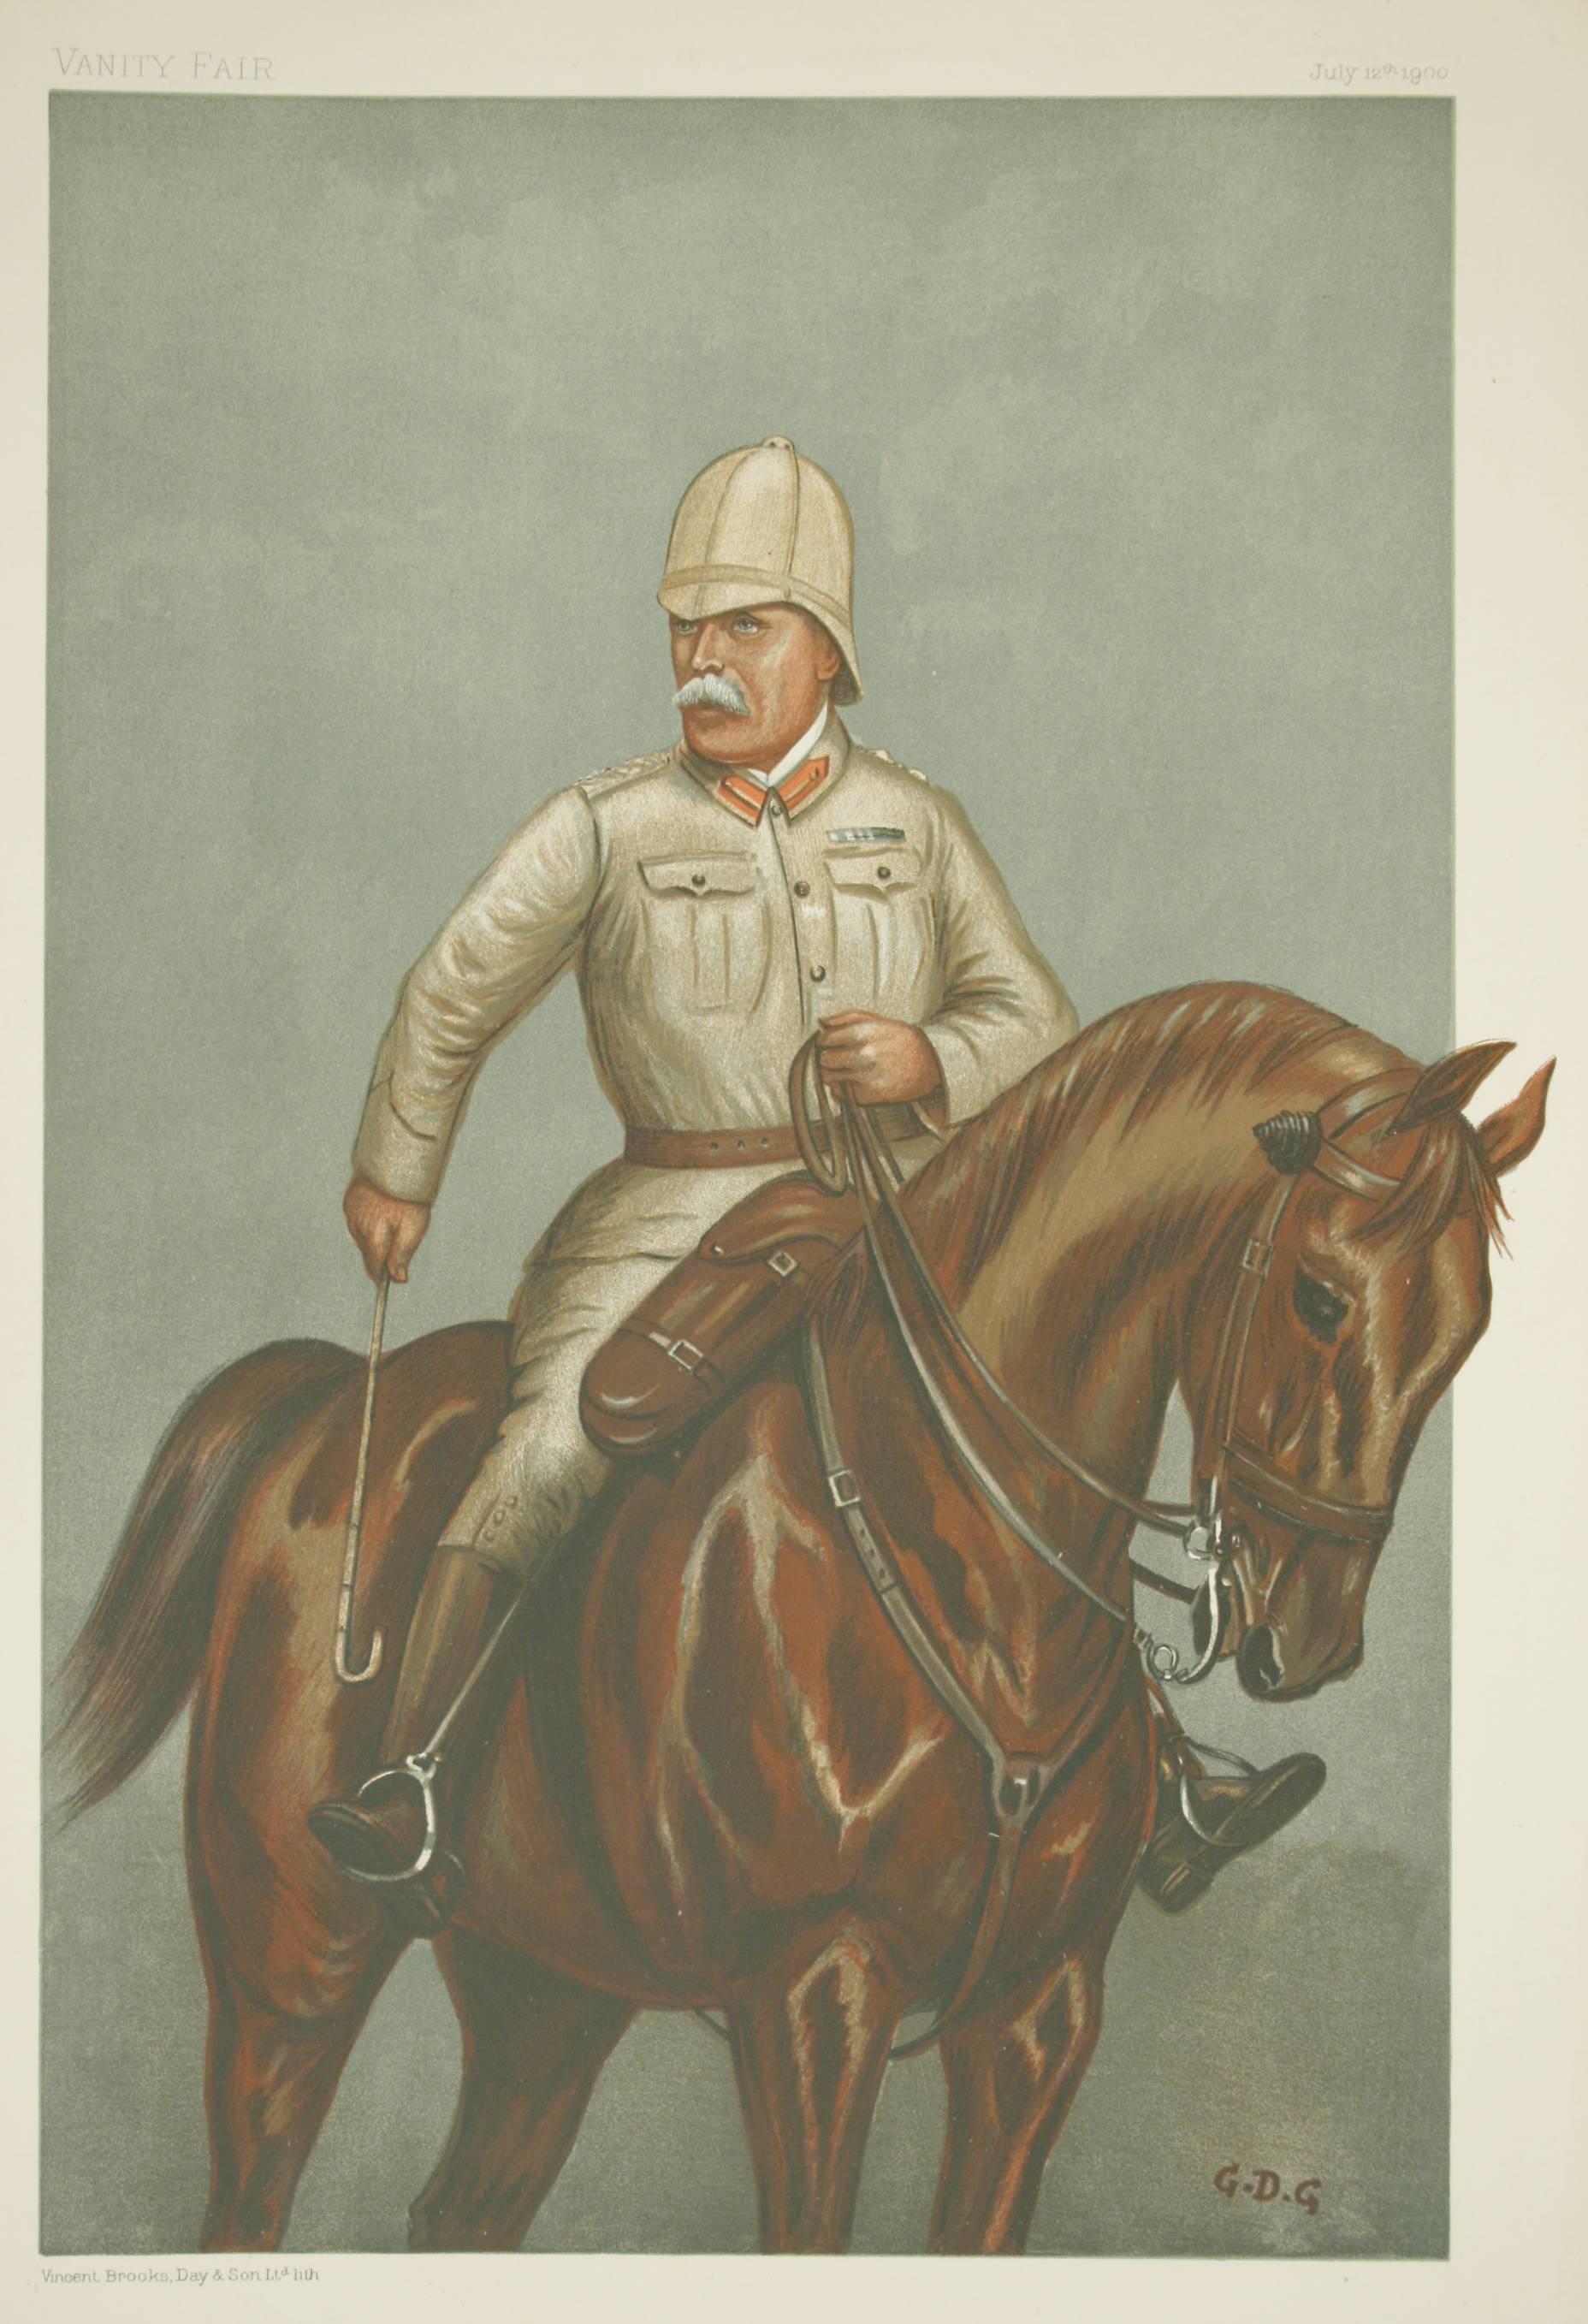 Vanity fair military print 'the Cavalry Division' after G.D.G.
A chromolithograph military print published 12th July, 1900, by Vincent Brooks, Day & Son Ltd. Lith., for Vanity Fair. The picture is titled 'the Cavalry Division' and is an original